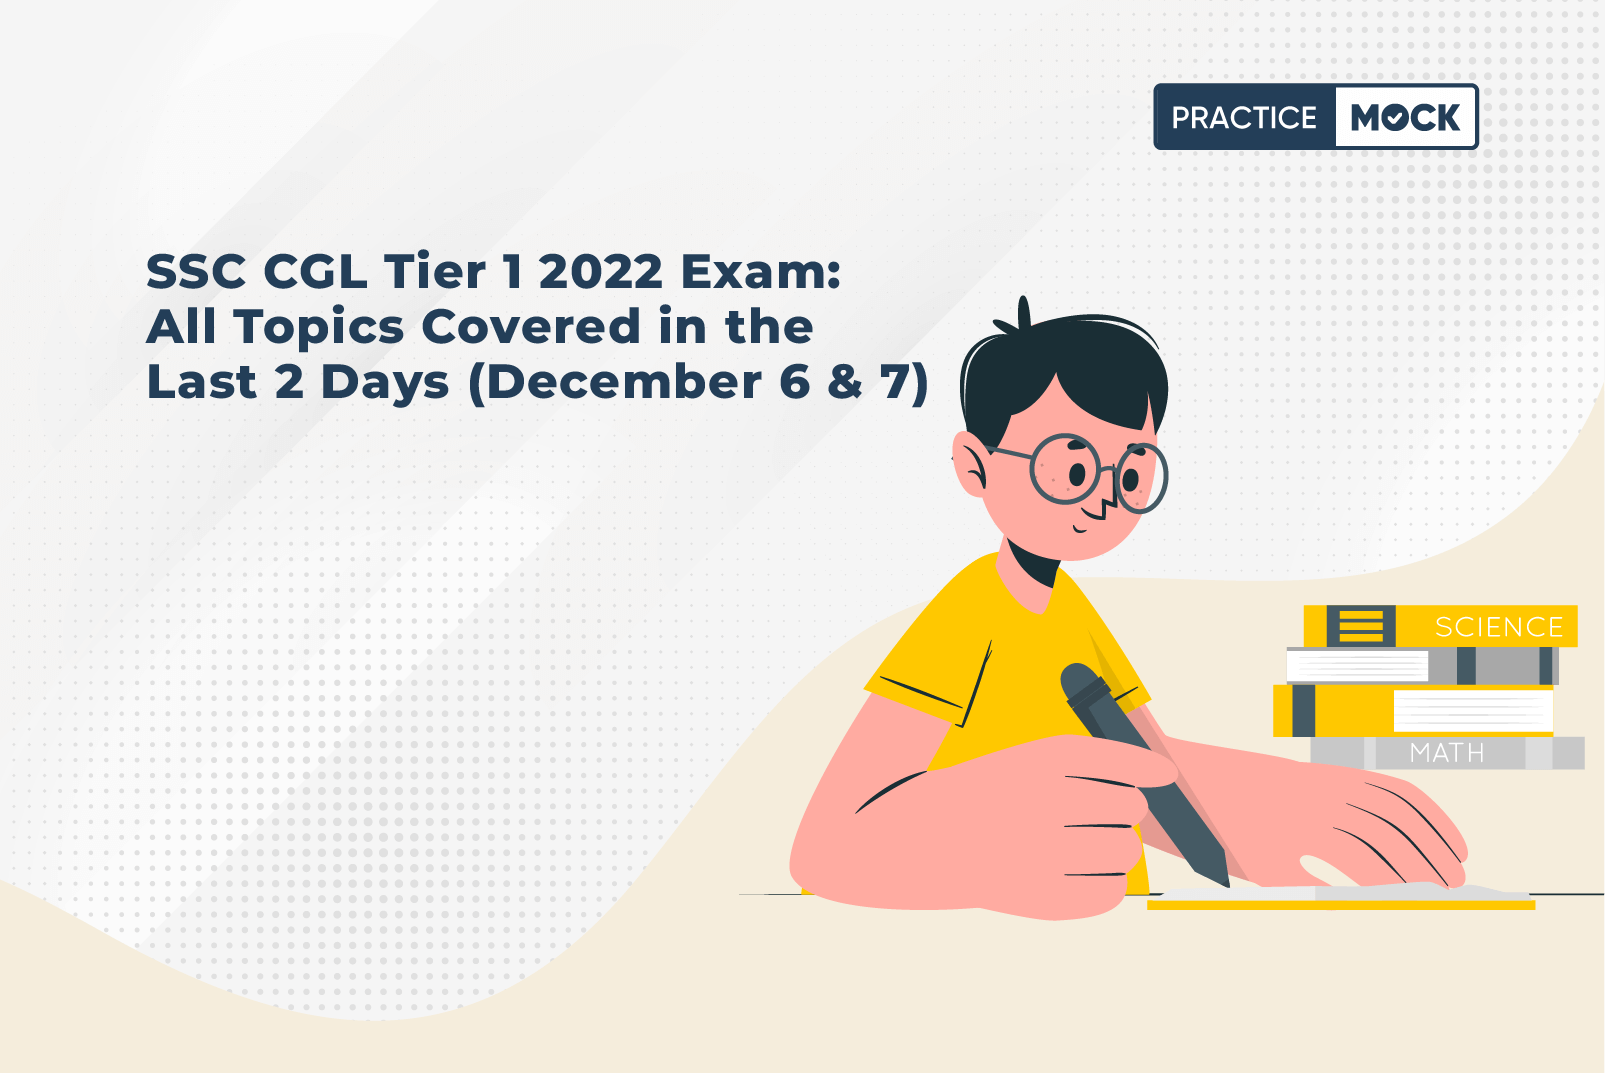 SSC CGL Tier 1 2022 Exam: All Topics Covered in the last 2 Days (December 6 & 7)